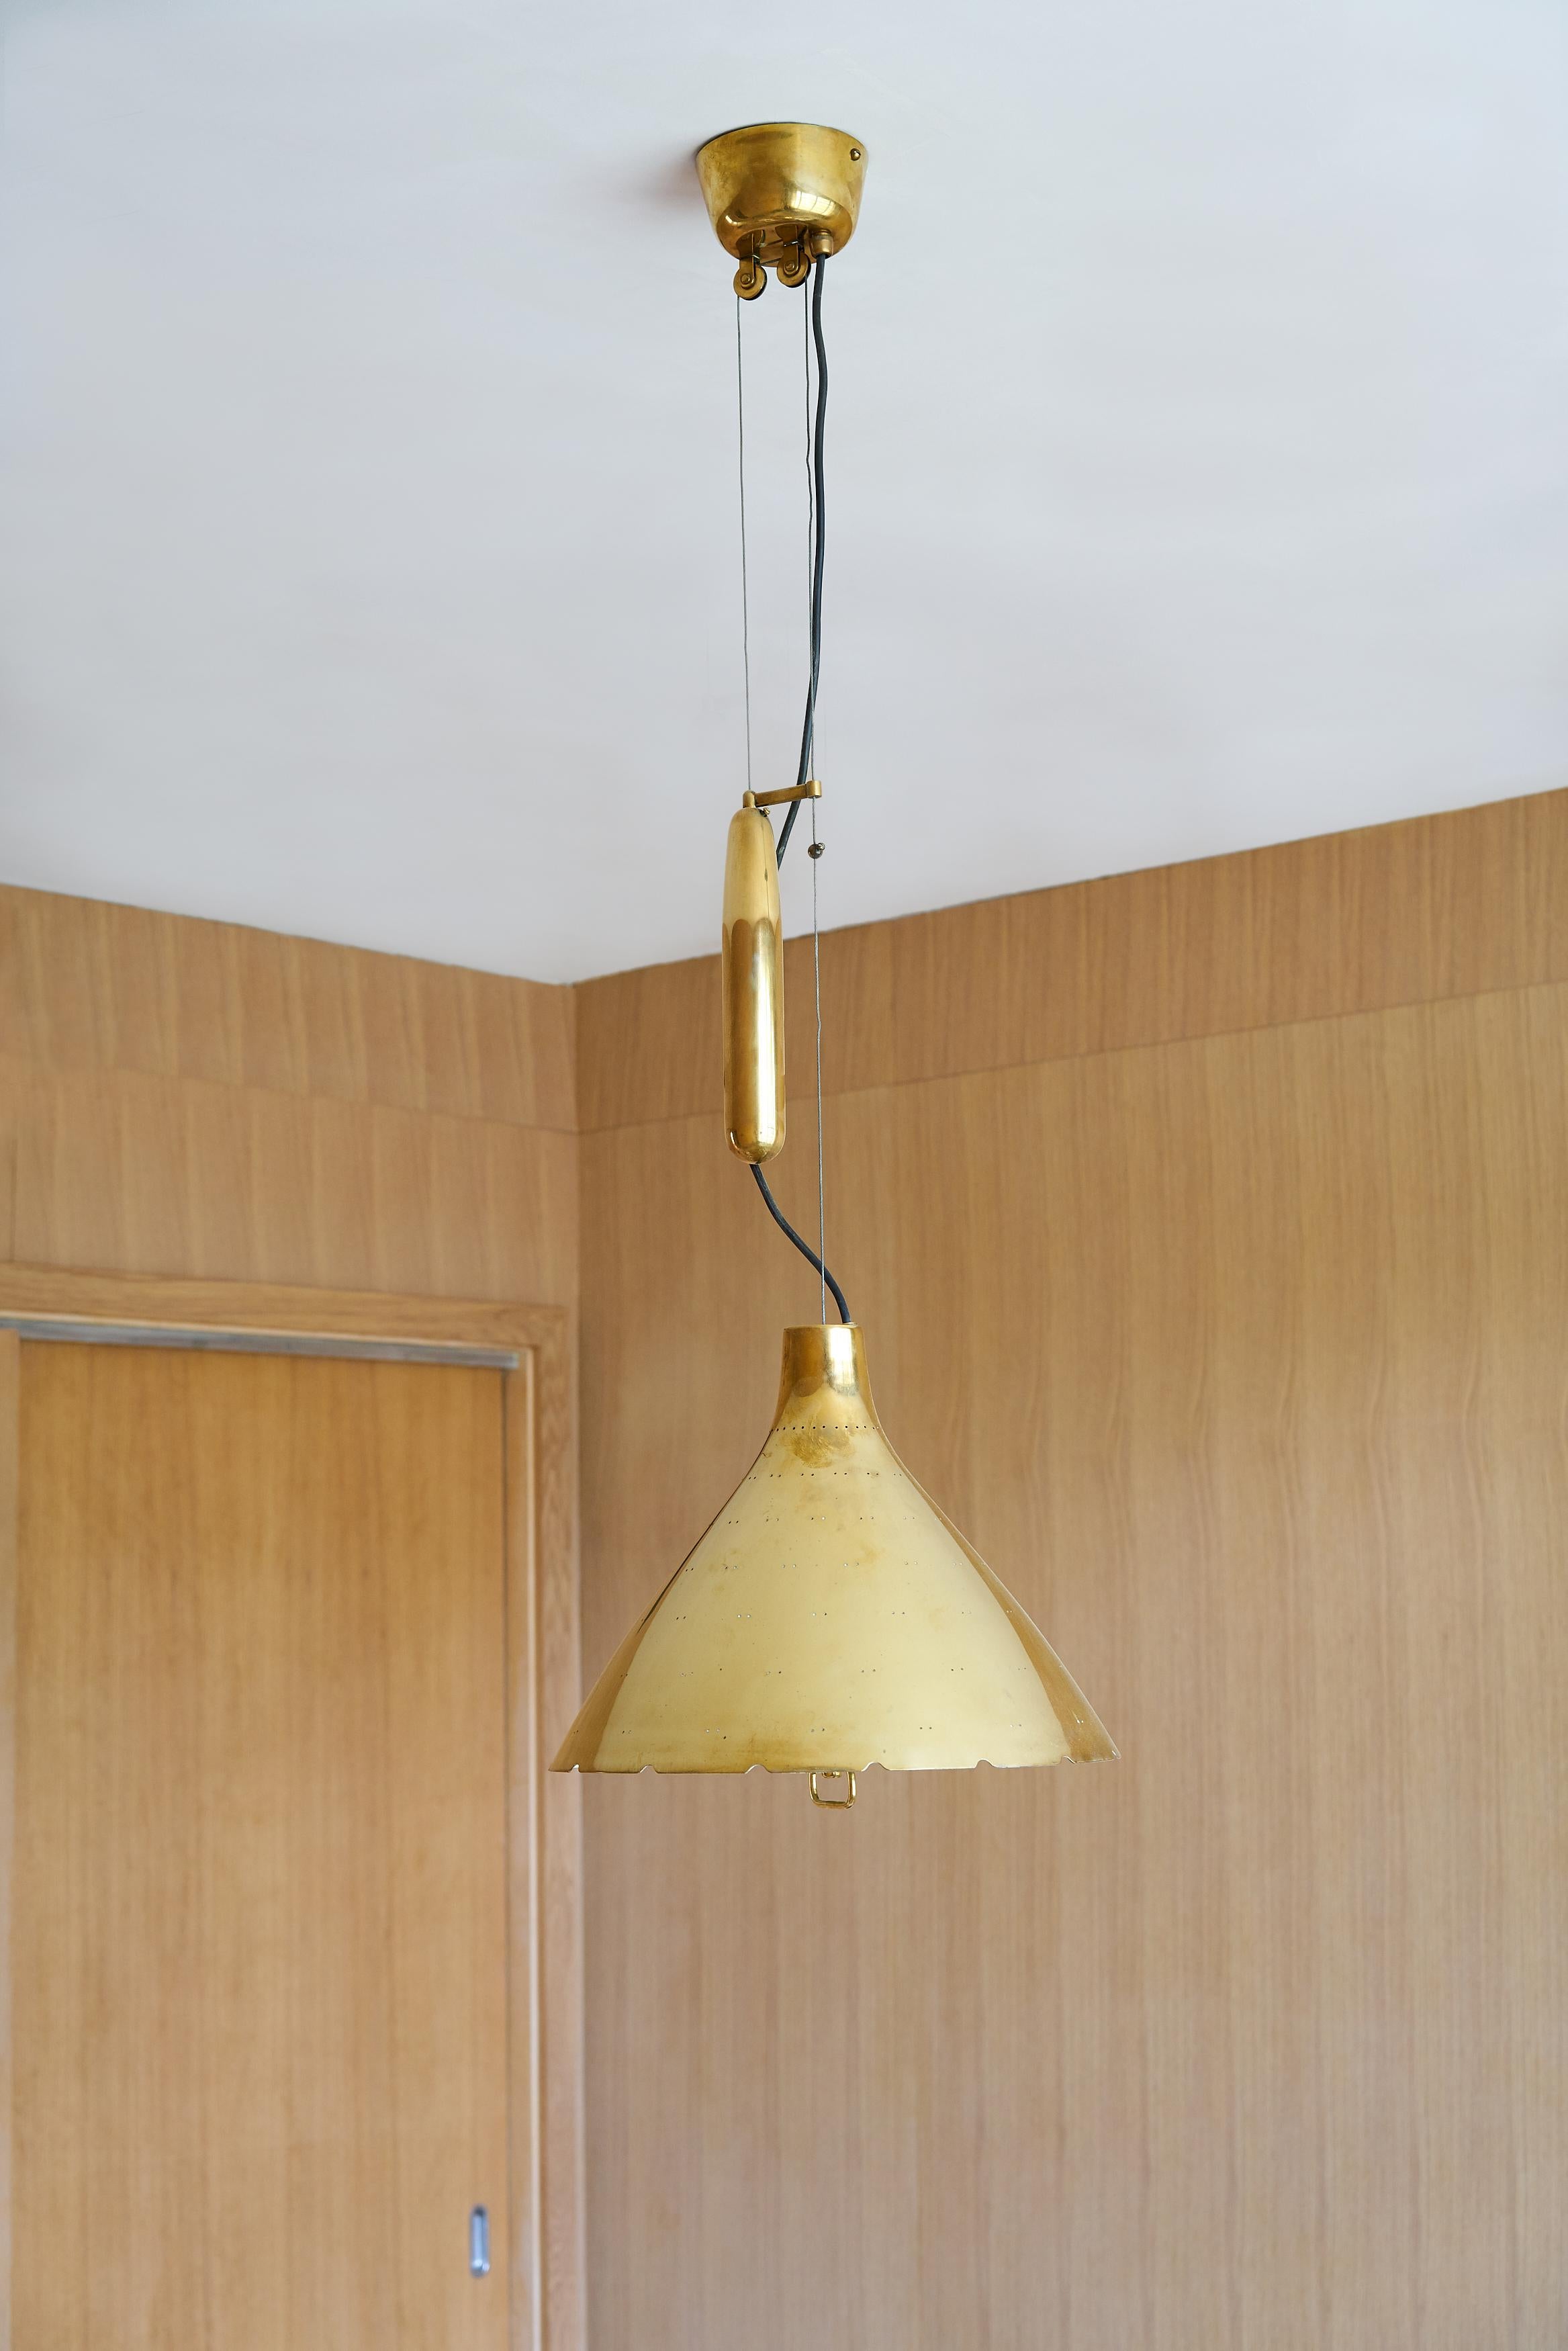 Paavo Tynell

Counterbalance ceiling lamp, model k2-46

Taito OY
Finland, 1940s
perforated and enameled brass
40 h × 14 dia in